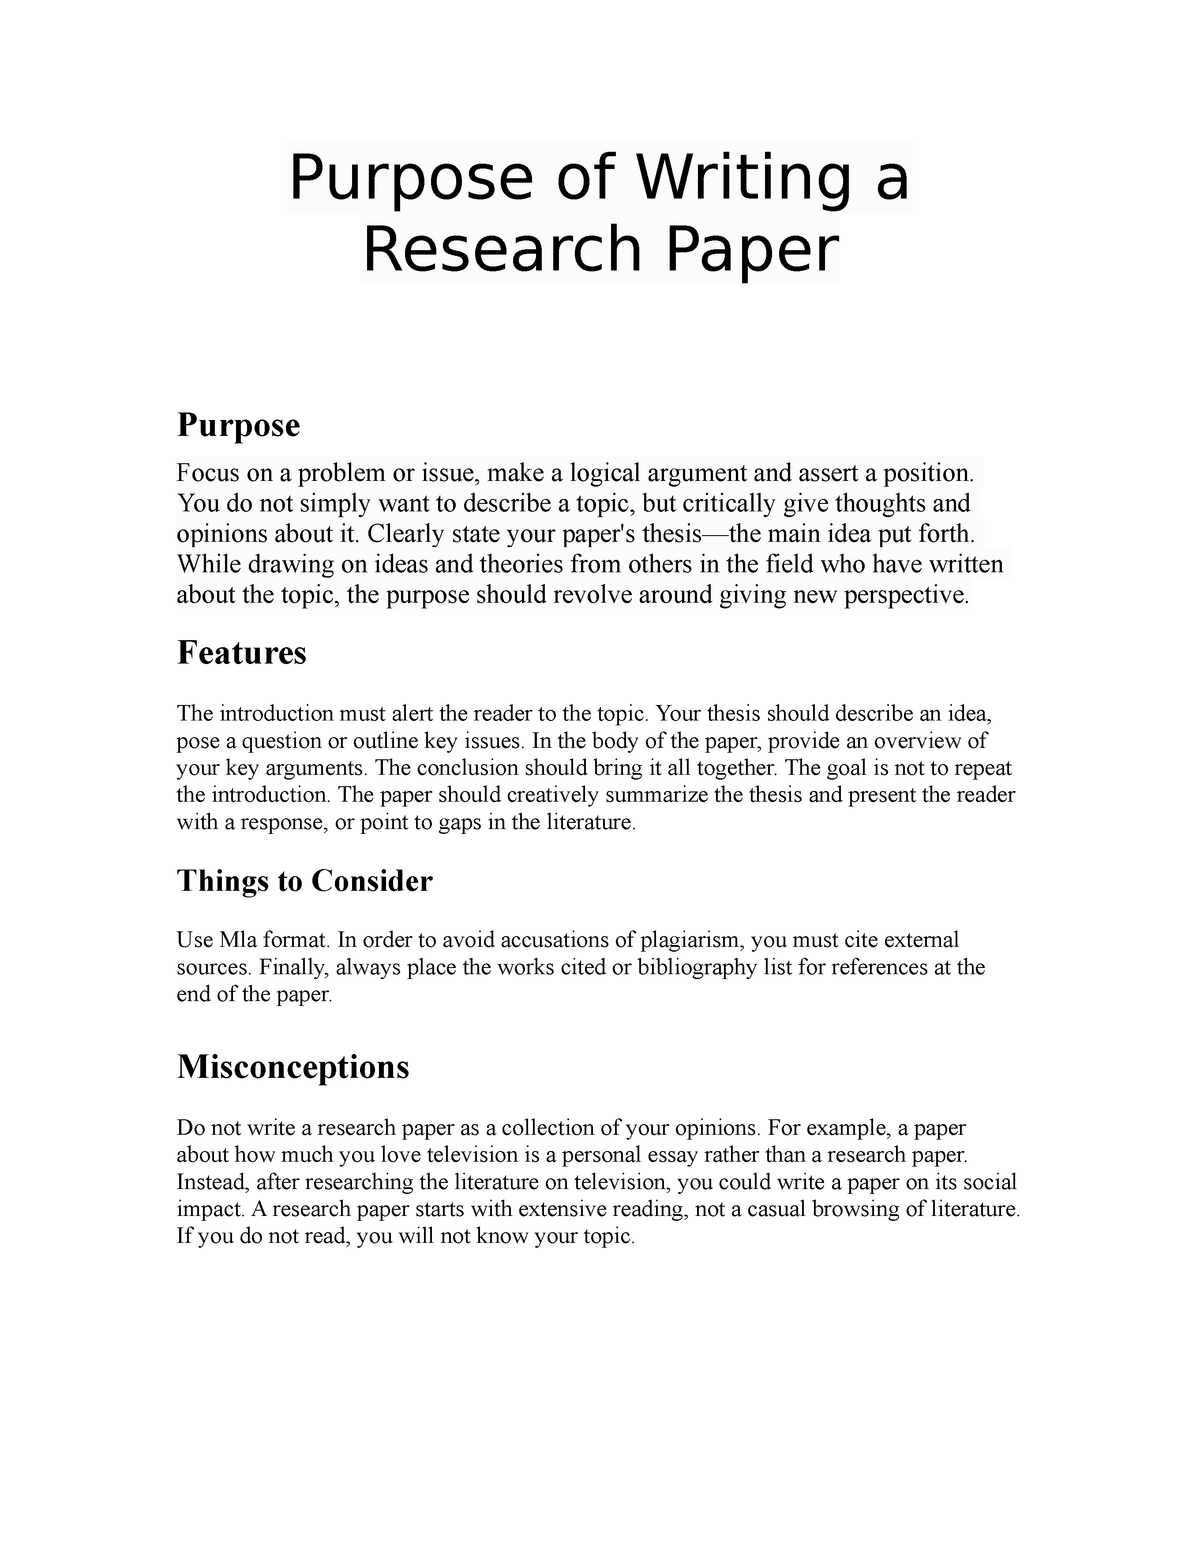 writing purpose of research paper